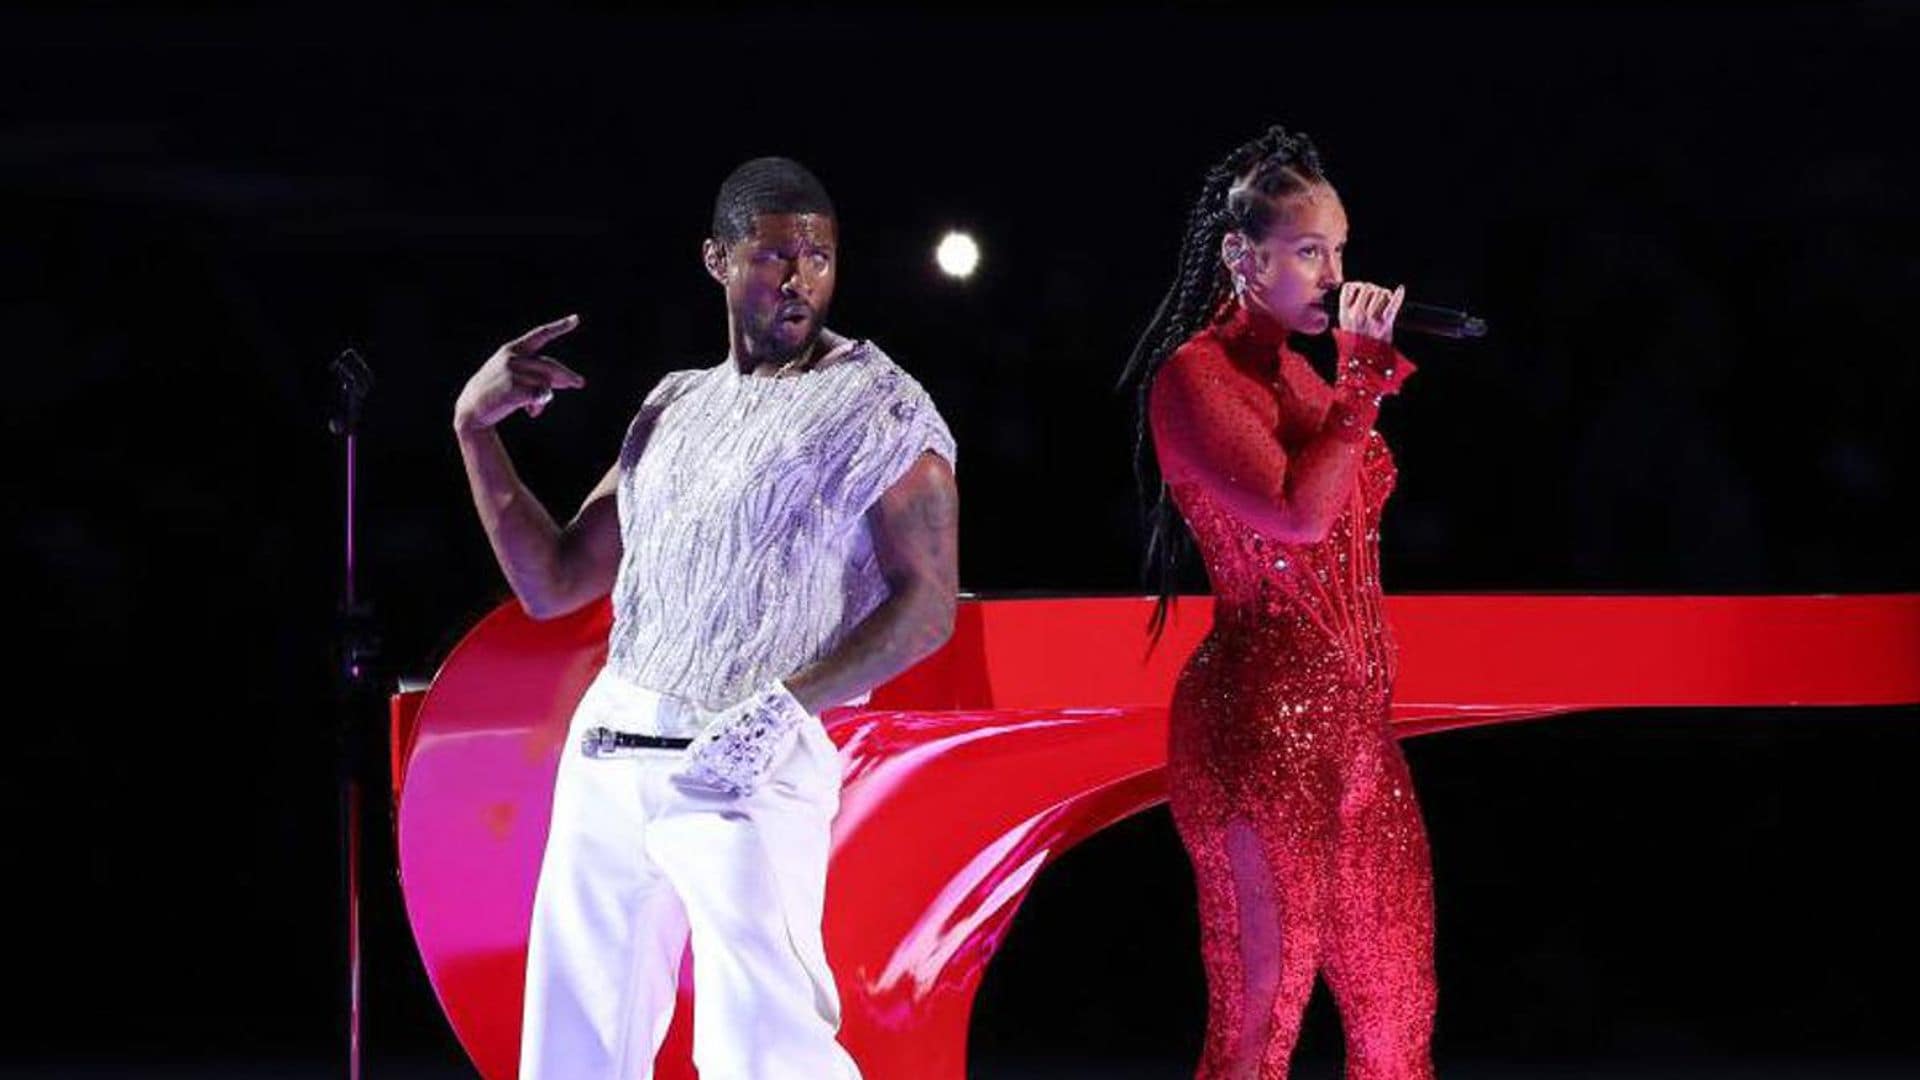 Super Bowl Half-Time Show updates: All about Usher’s performance